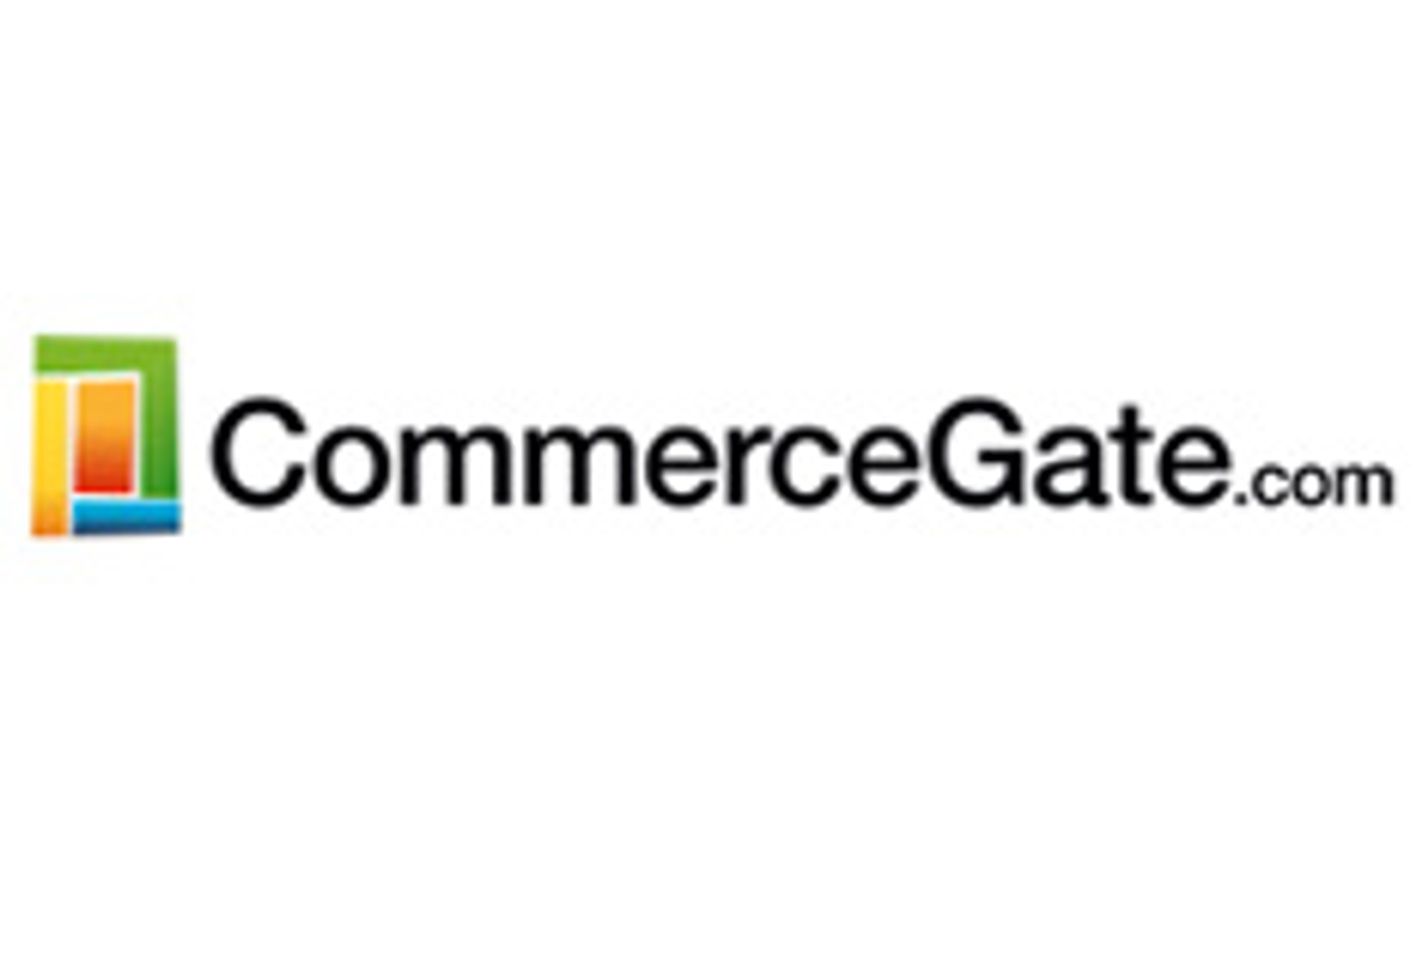 CommerceGate Streamlines Multi-Currency Payments for U.S. Merchants